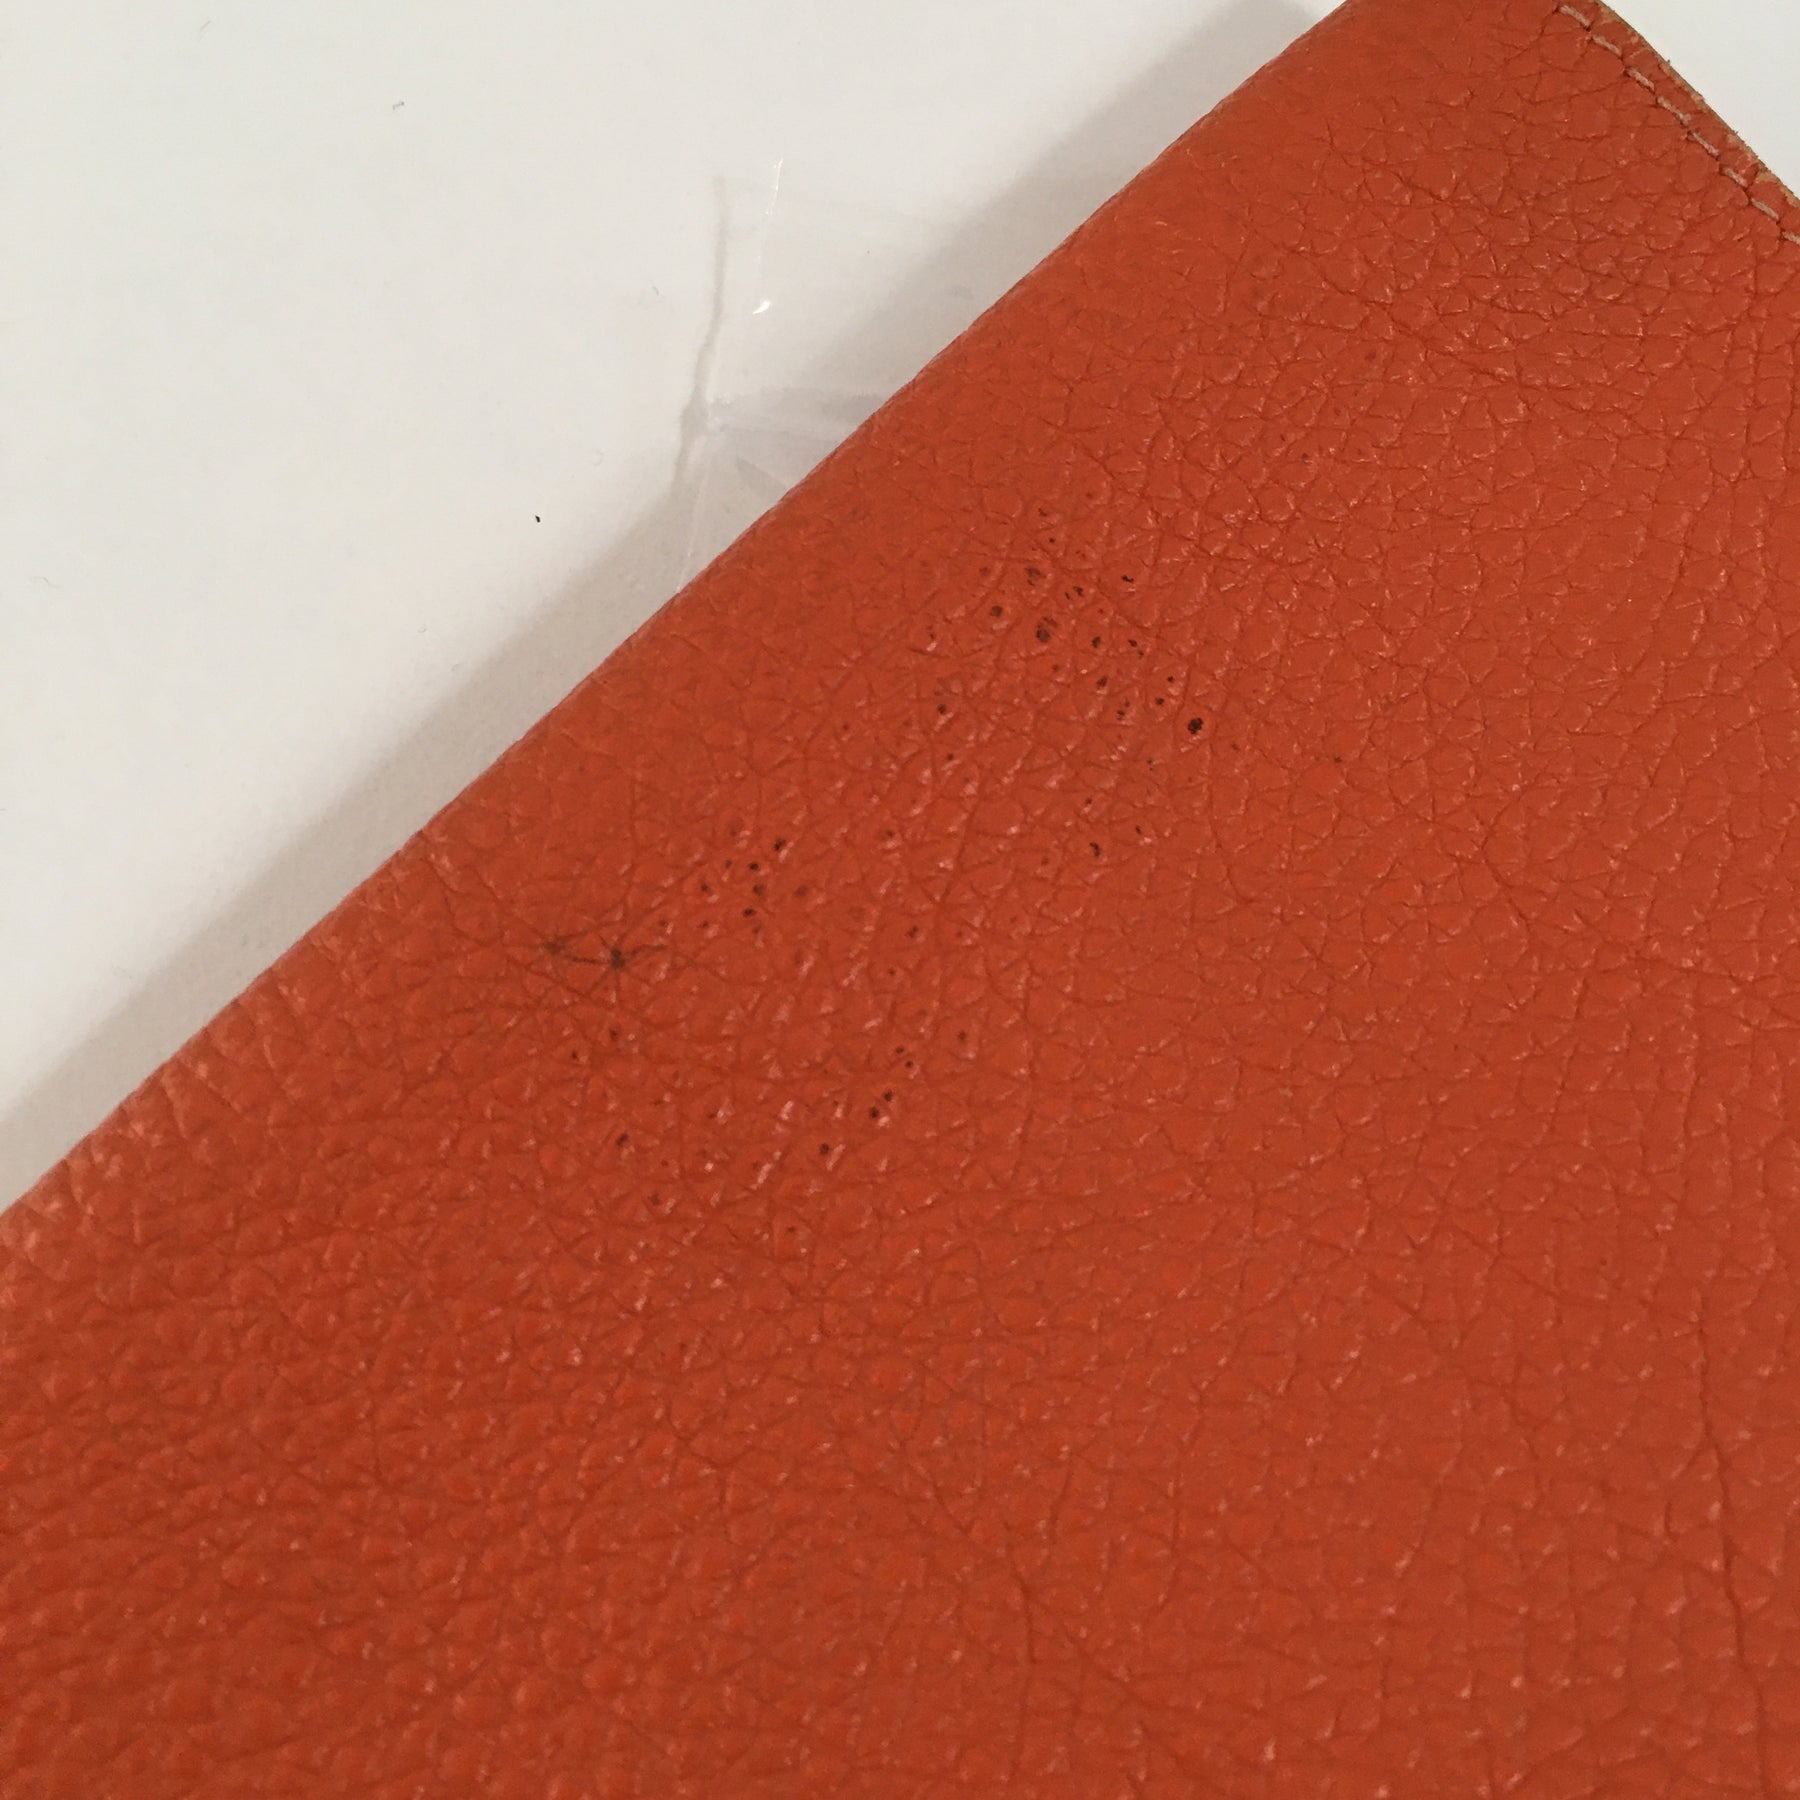 Hermès - Authenticated Dogon Wallet - Leather Orange for Women, Good Condition